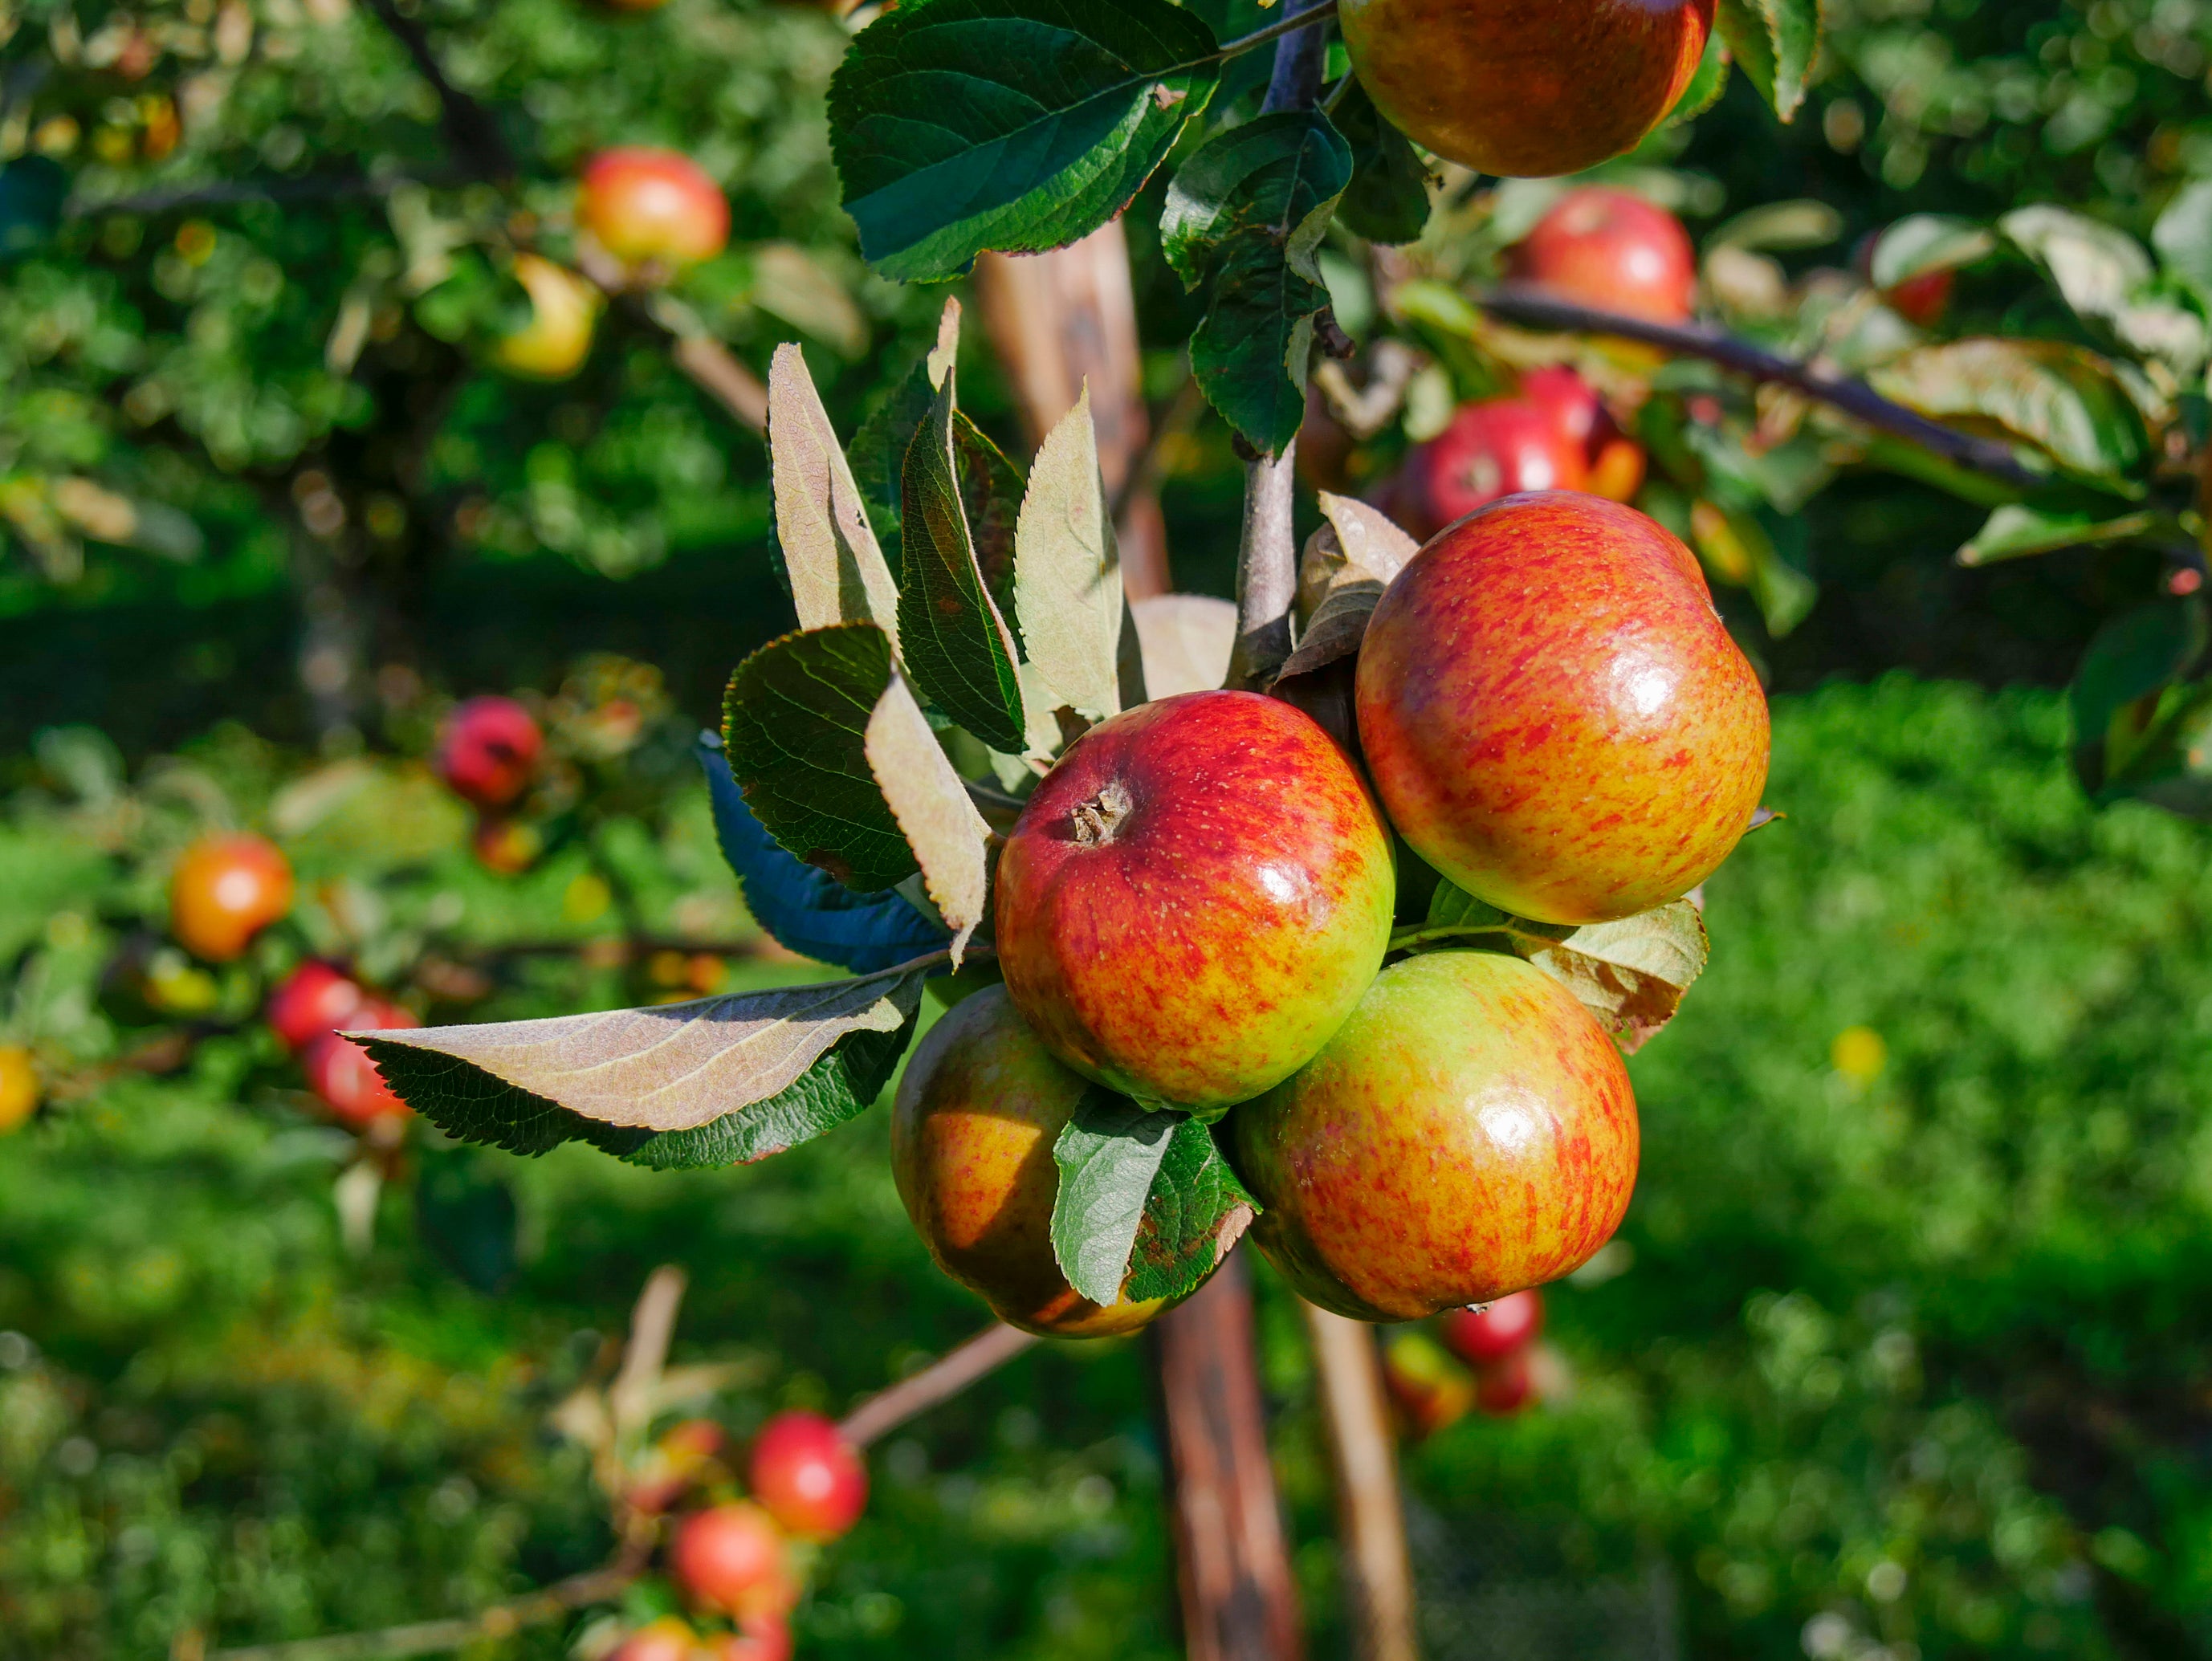 Orchard apples at Ardress House (Colin Beacom/National Trust Images/PA)